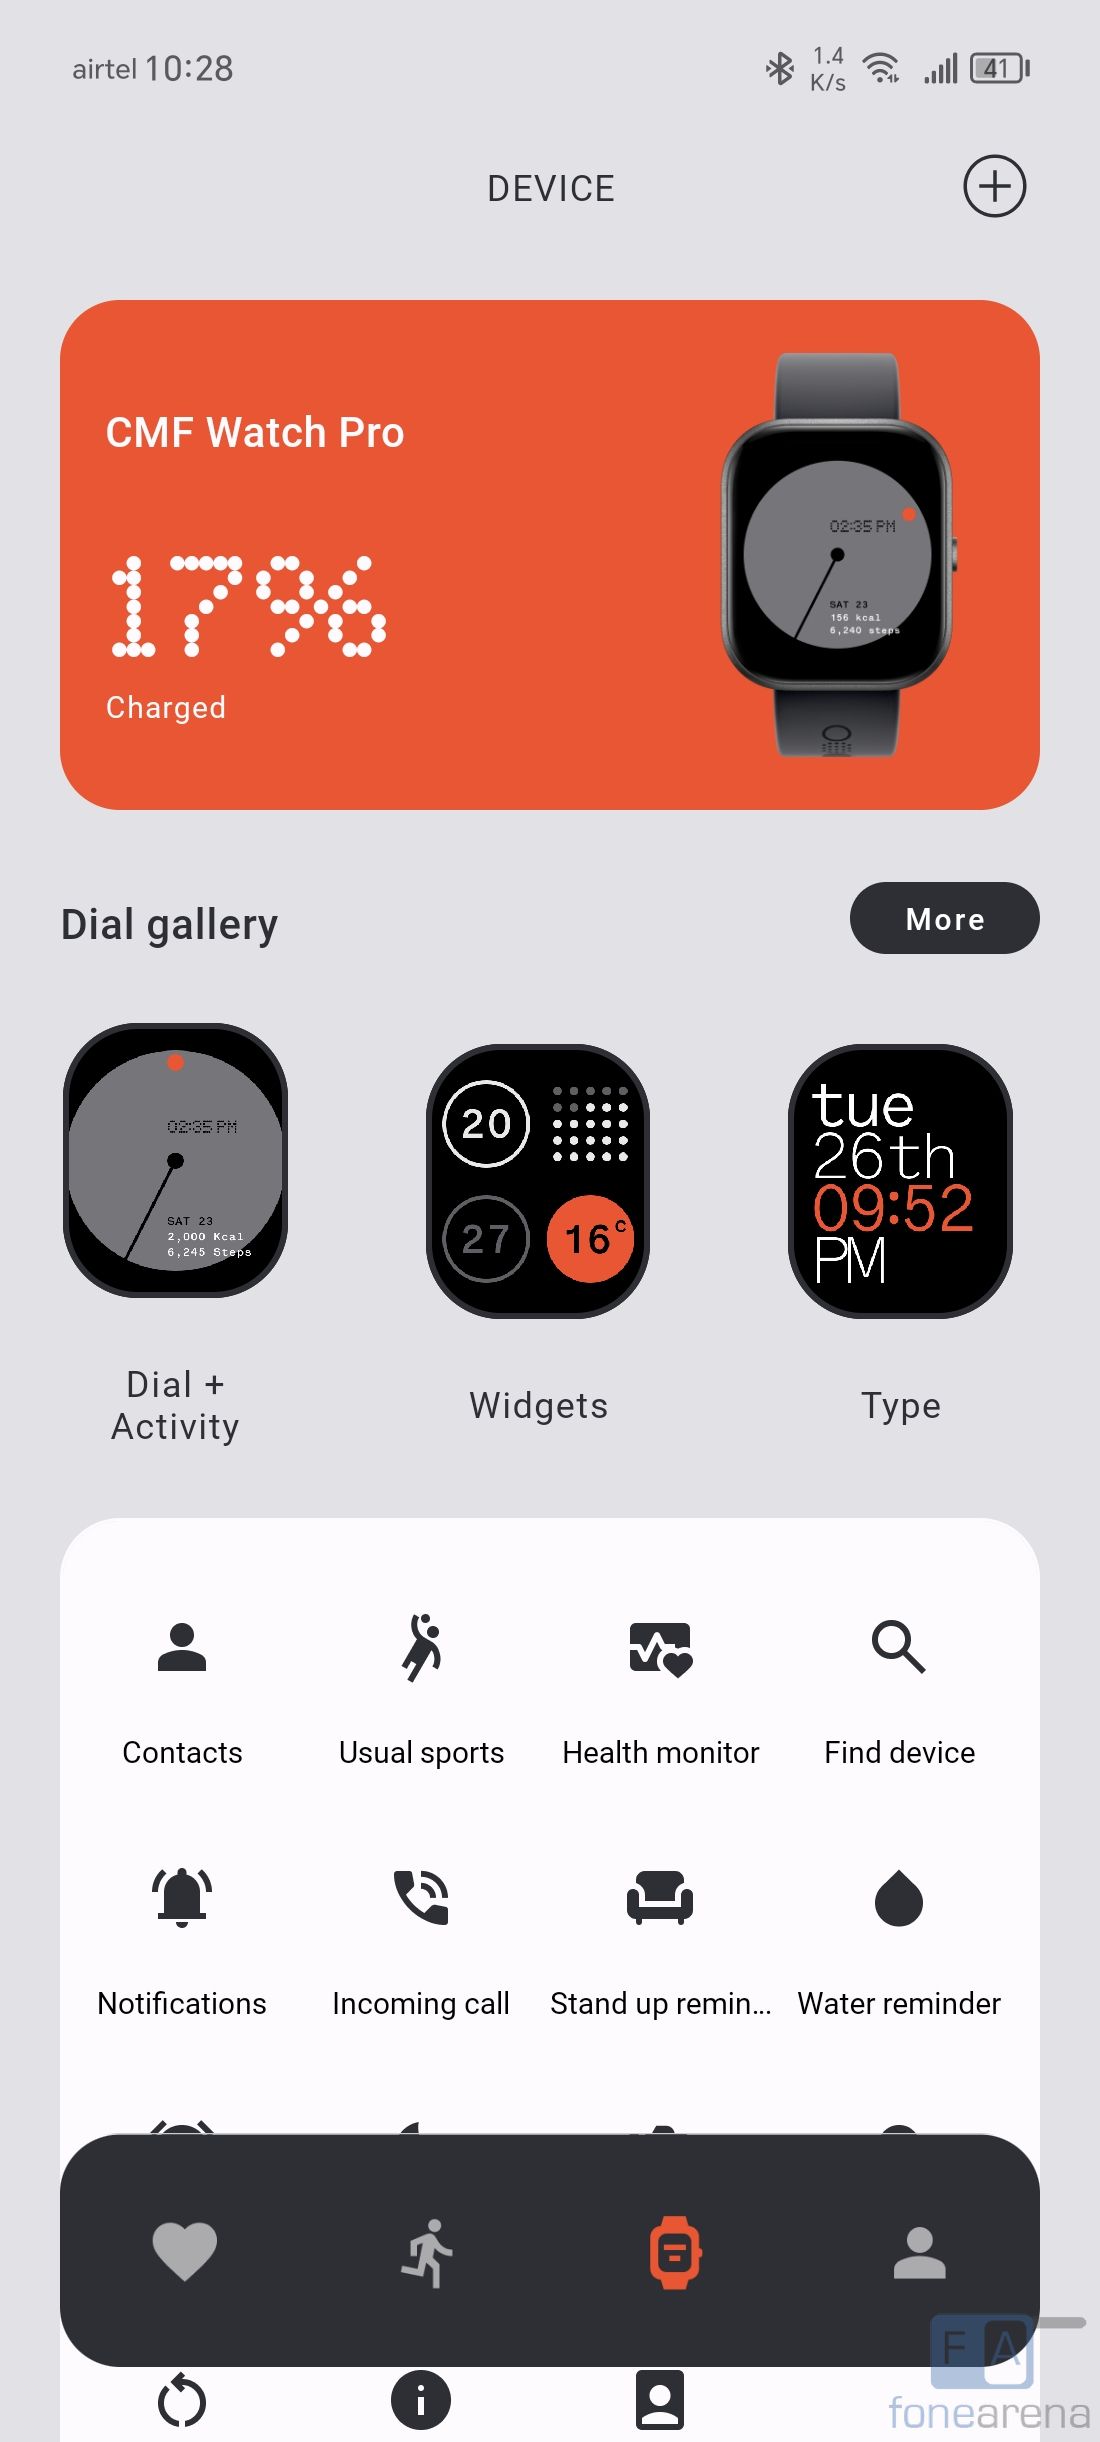 Nothing cmf Watch Face - Apps on Google Play